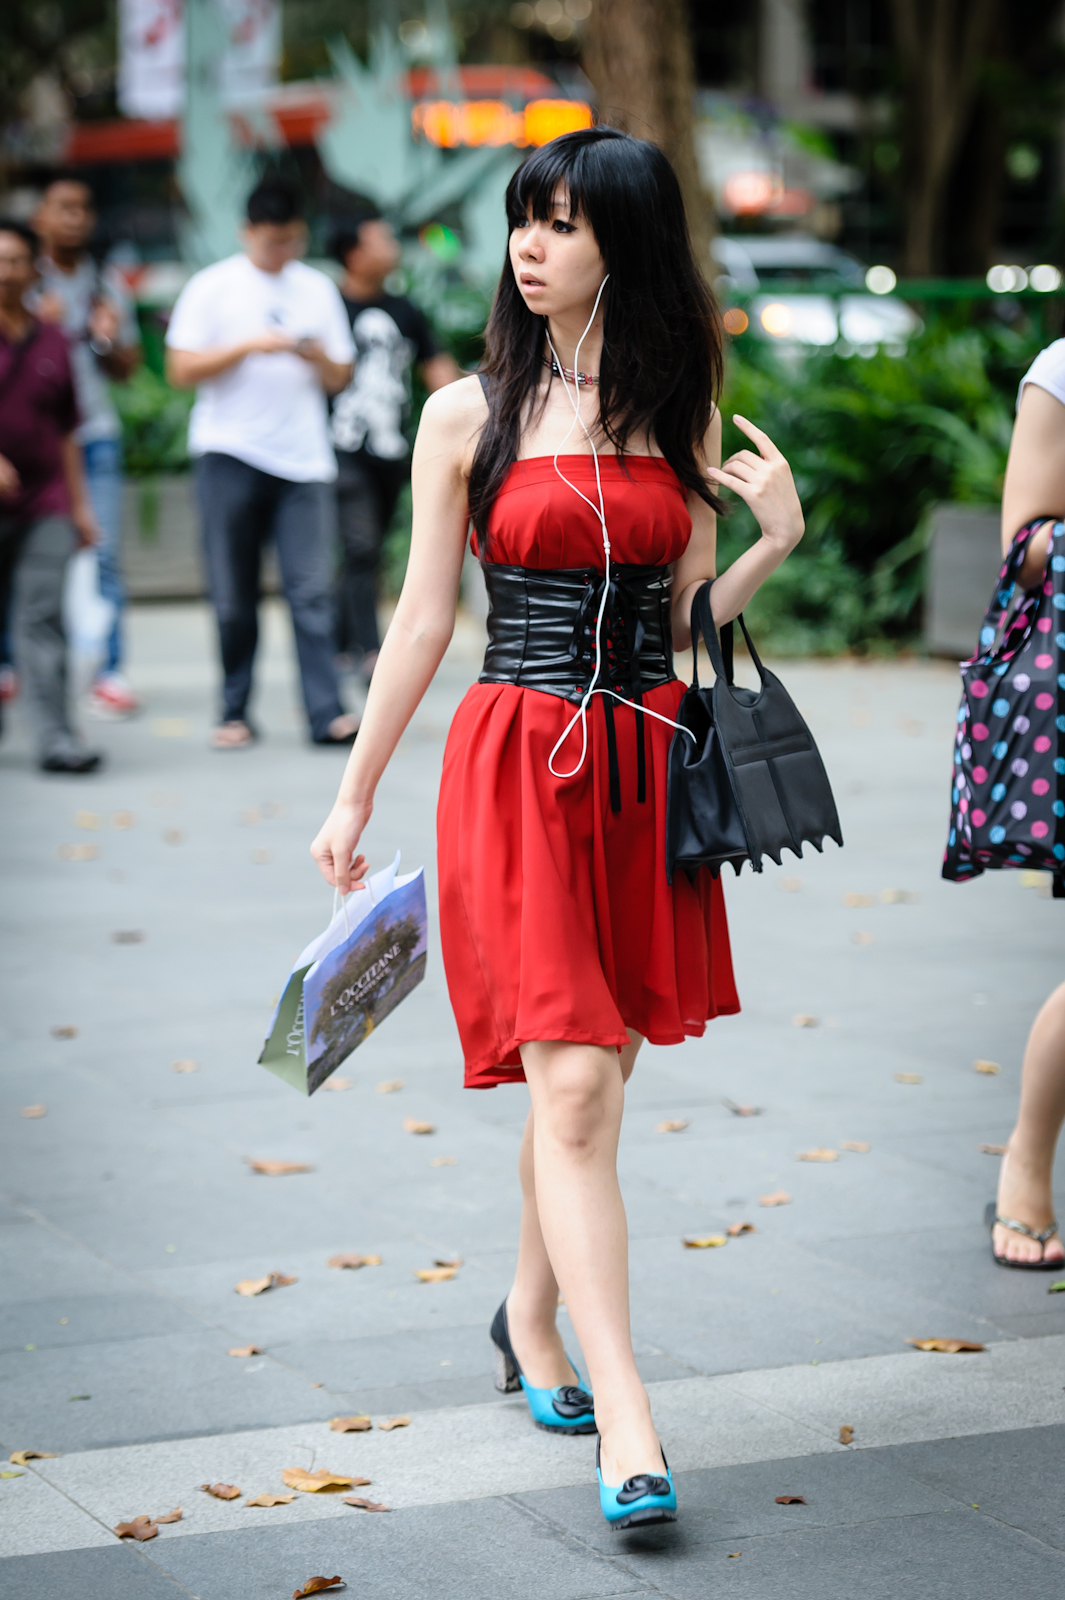 Street fashion in Orchard